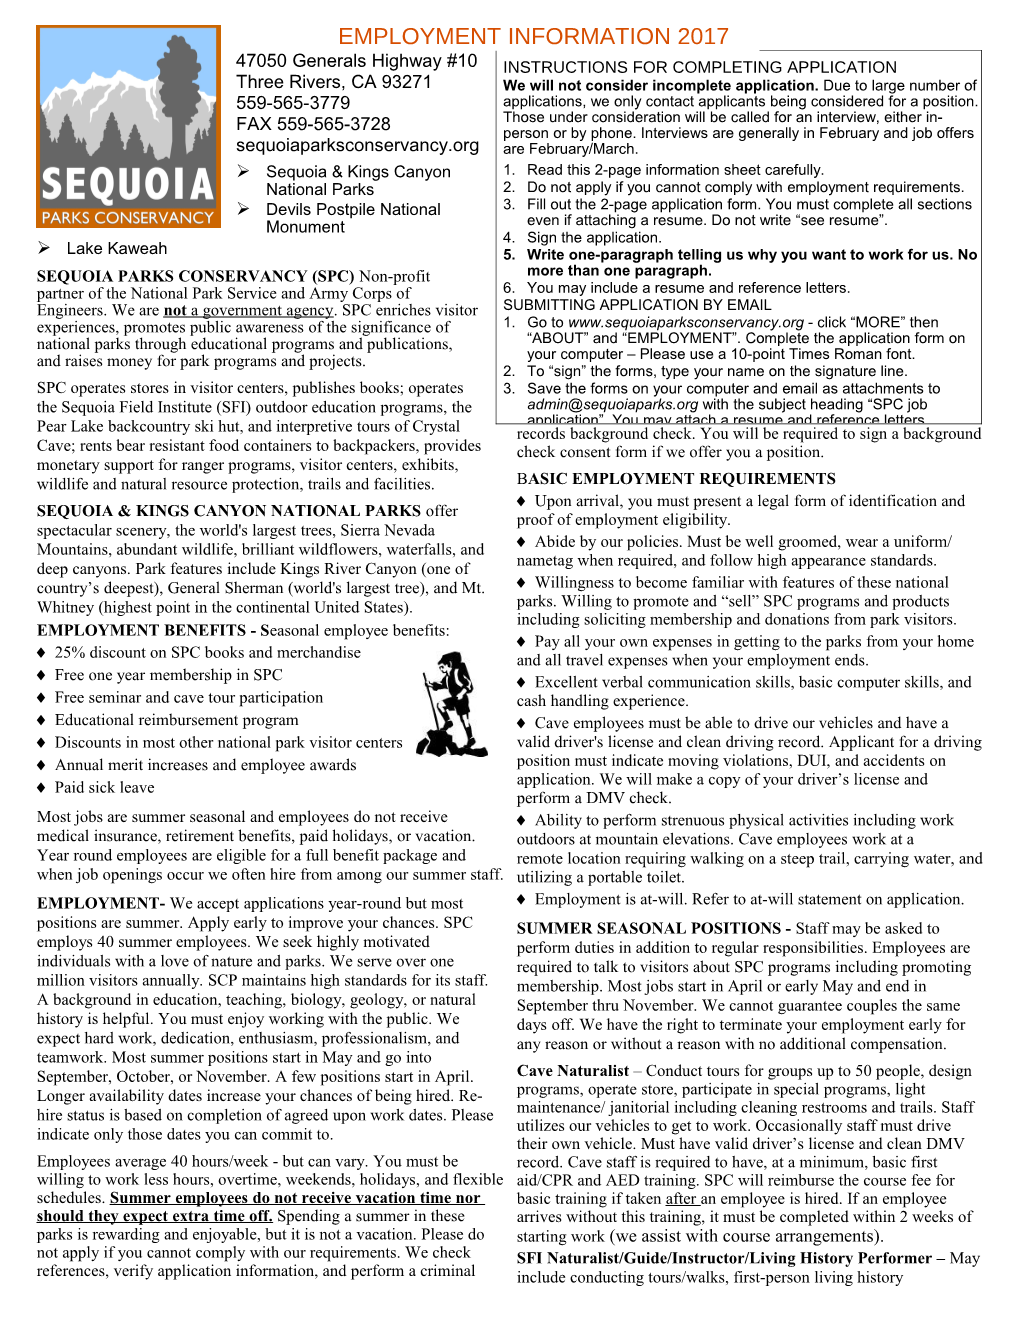 Sequoia Natural History Association Employment Application